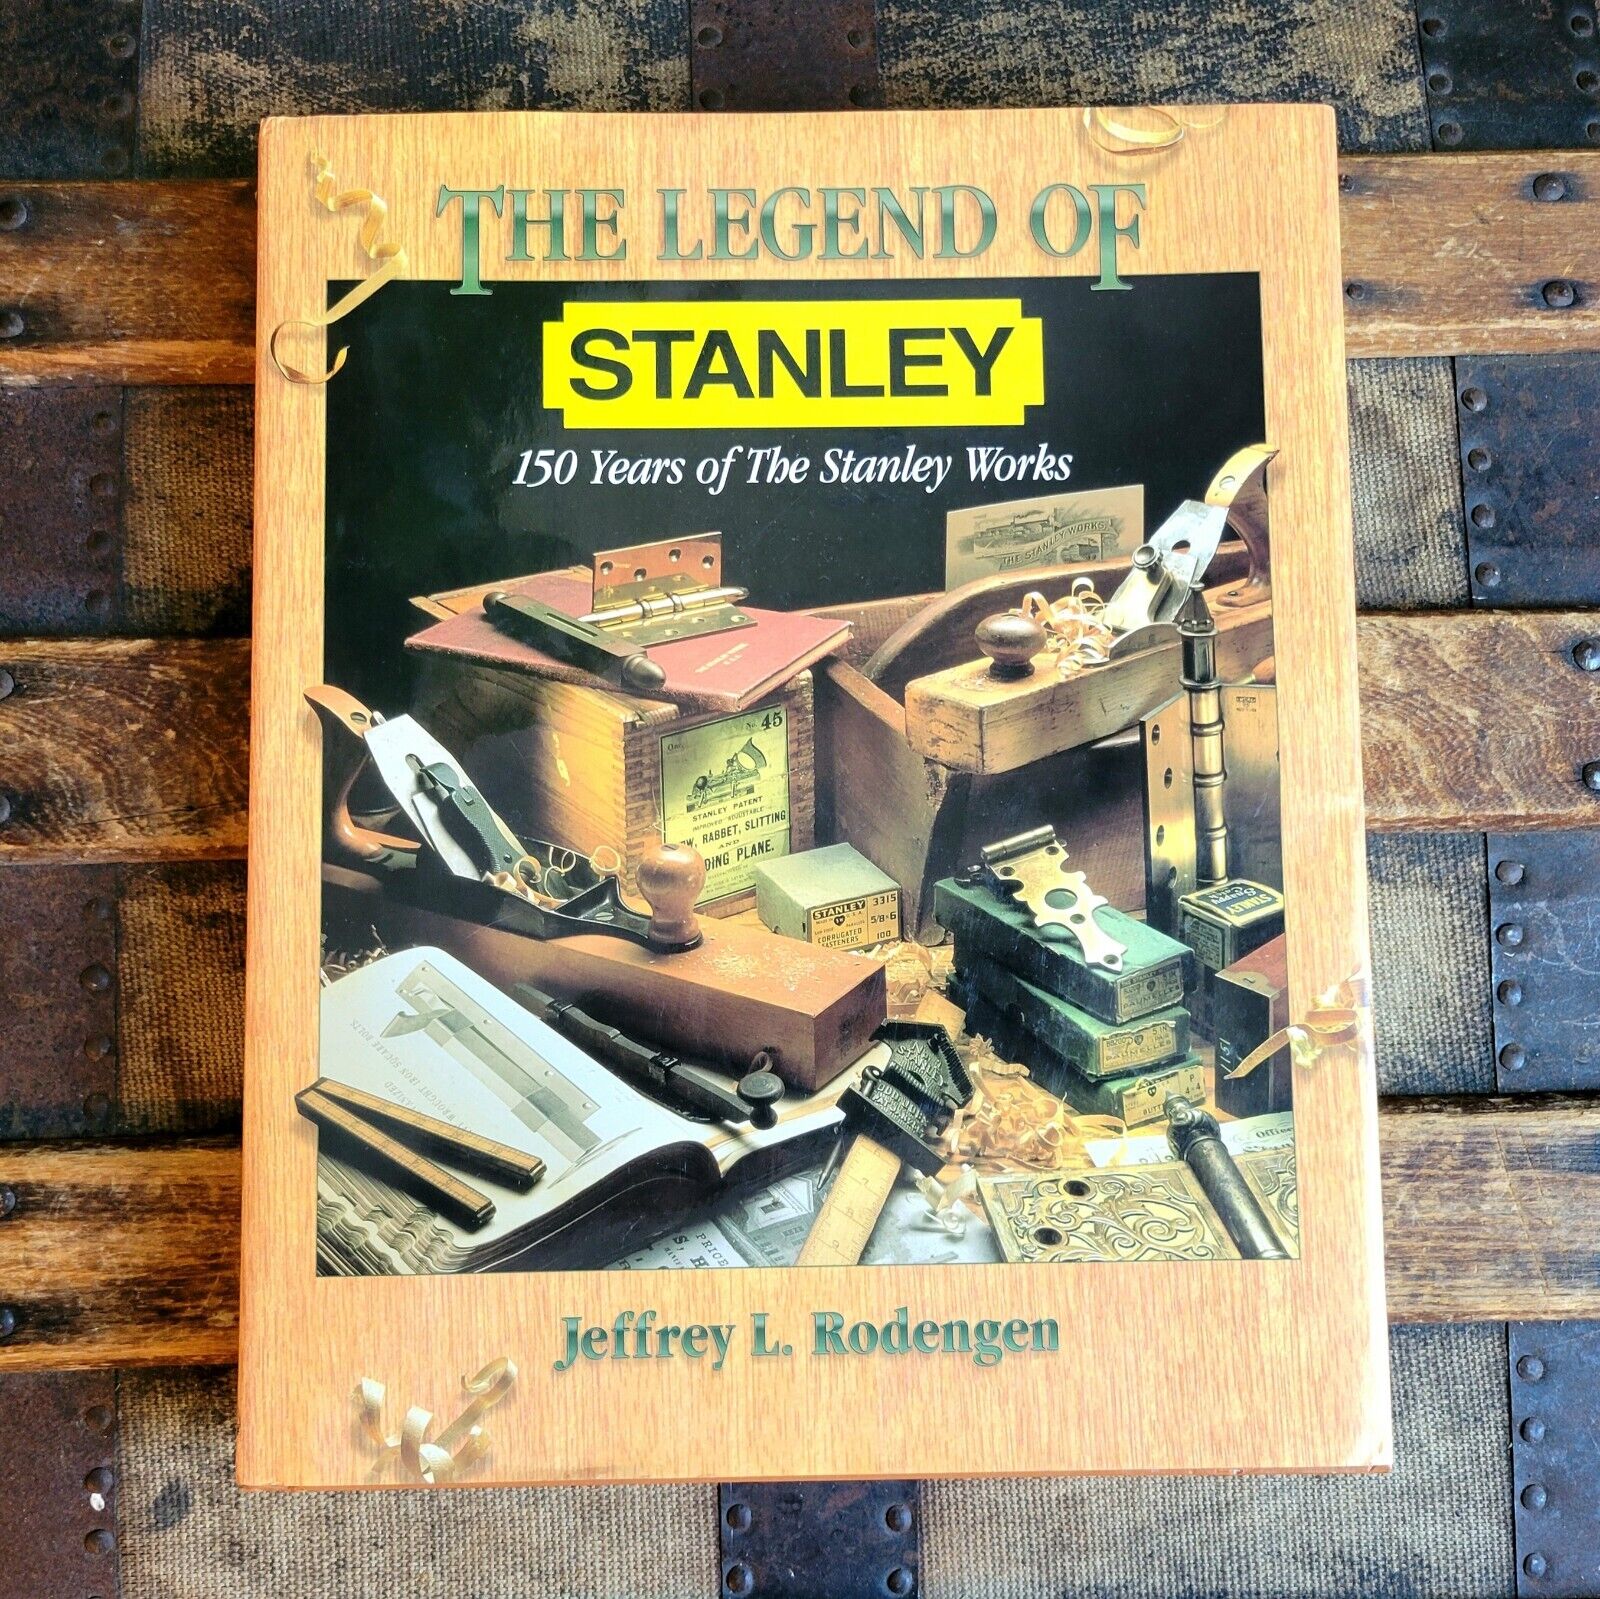 The Legend of STANLEY : 150 Years of the Stanley Works - Jeffrey Rodengen (1996)